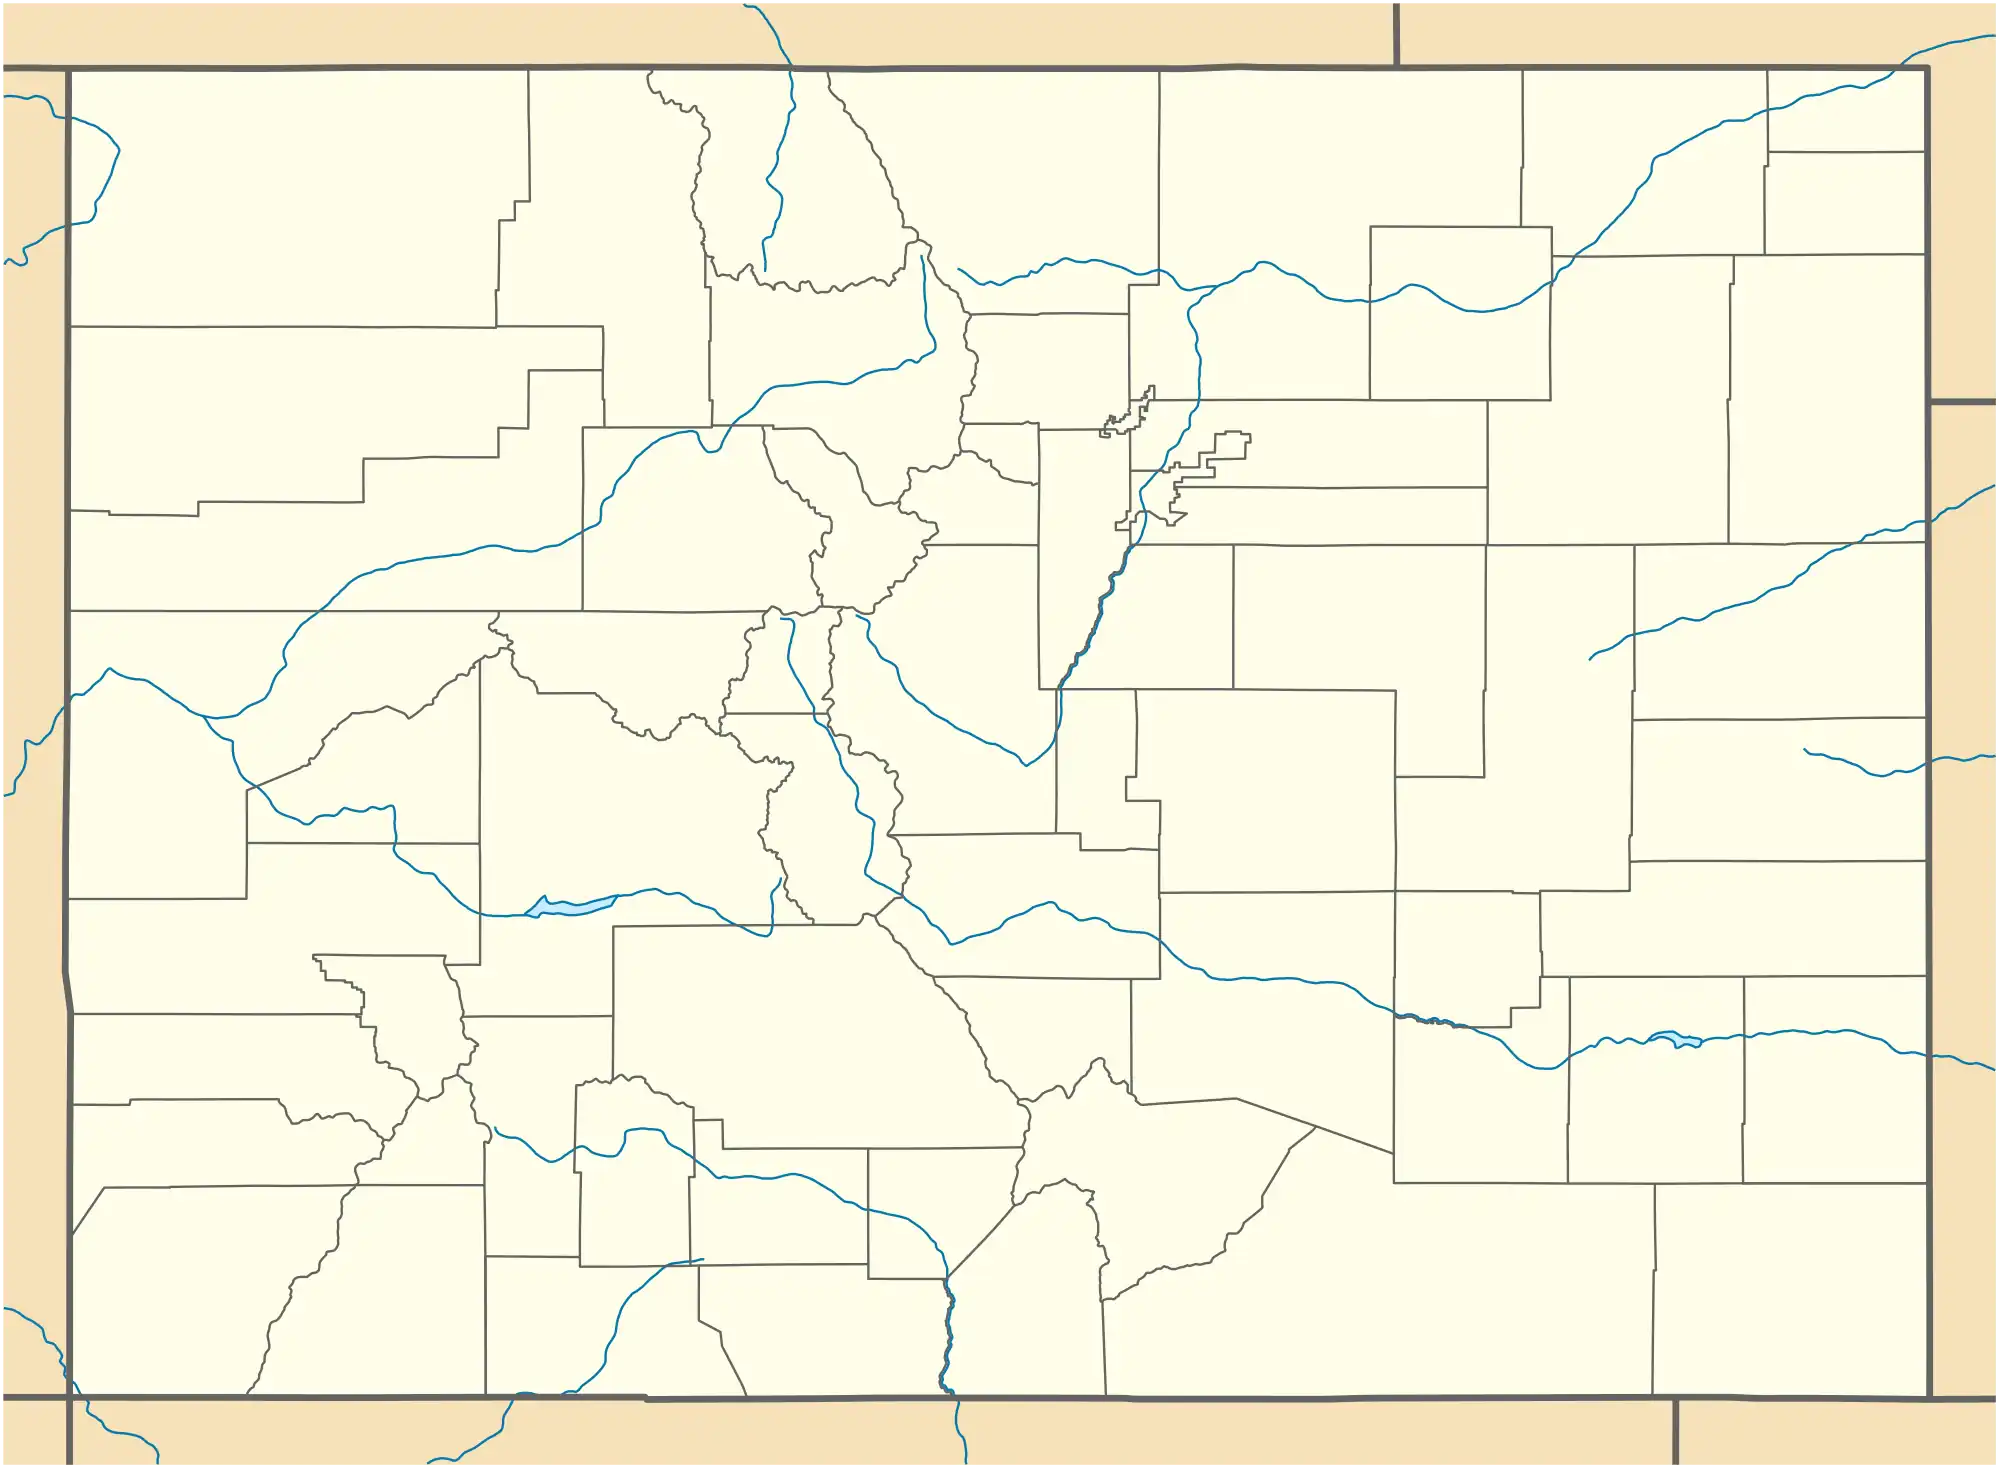 A map of Colorado showing county boundaries and major rivers. There is a red dot in the center of Pitkin County in the west central region of the state